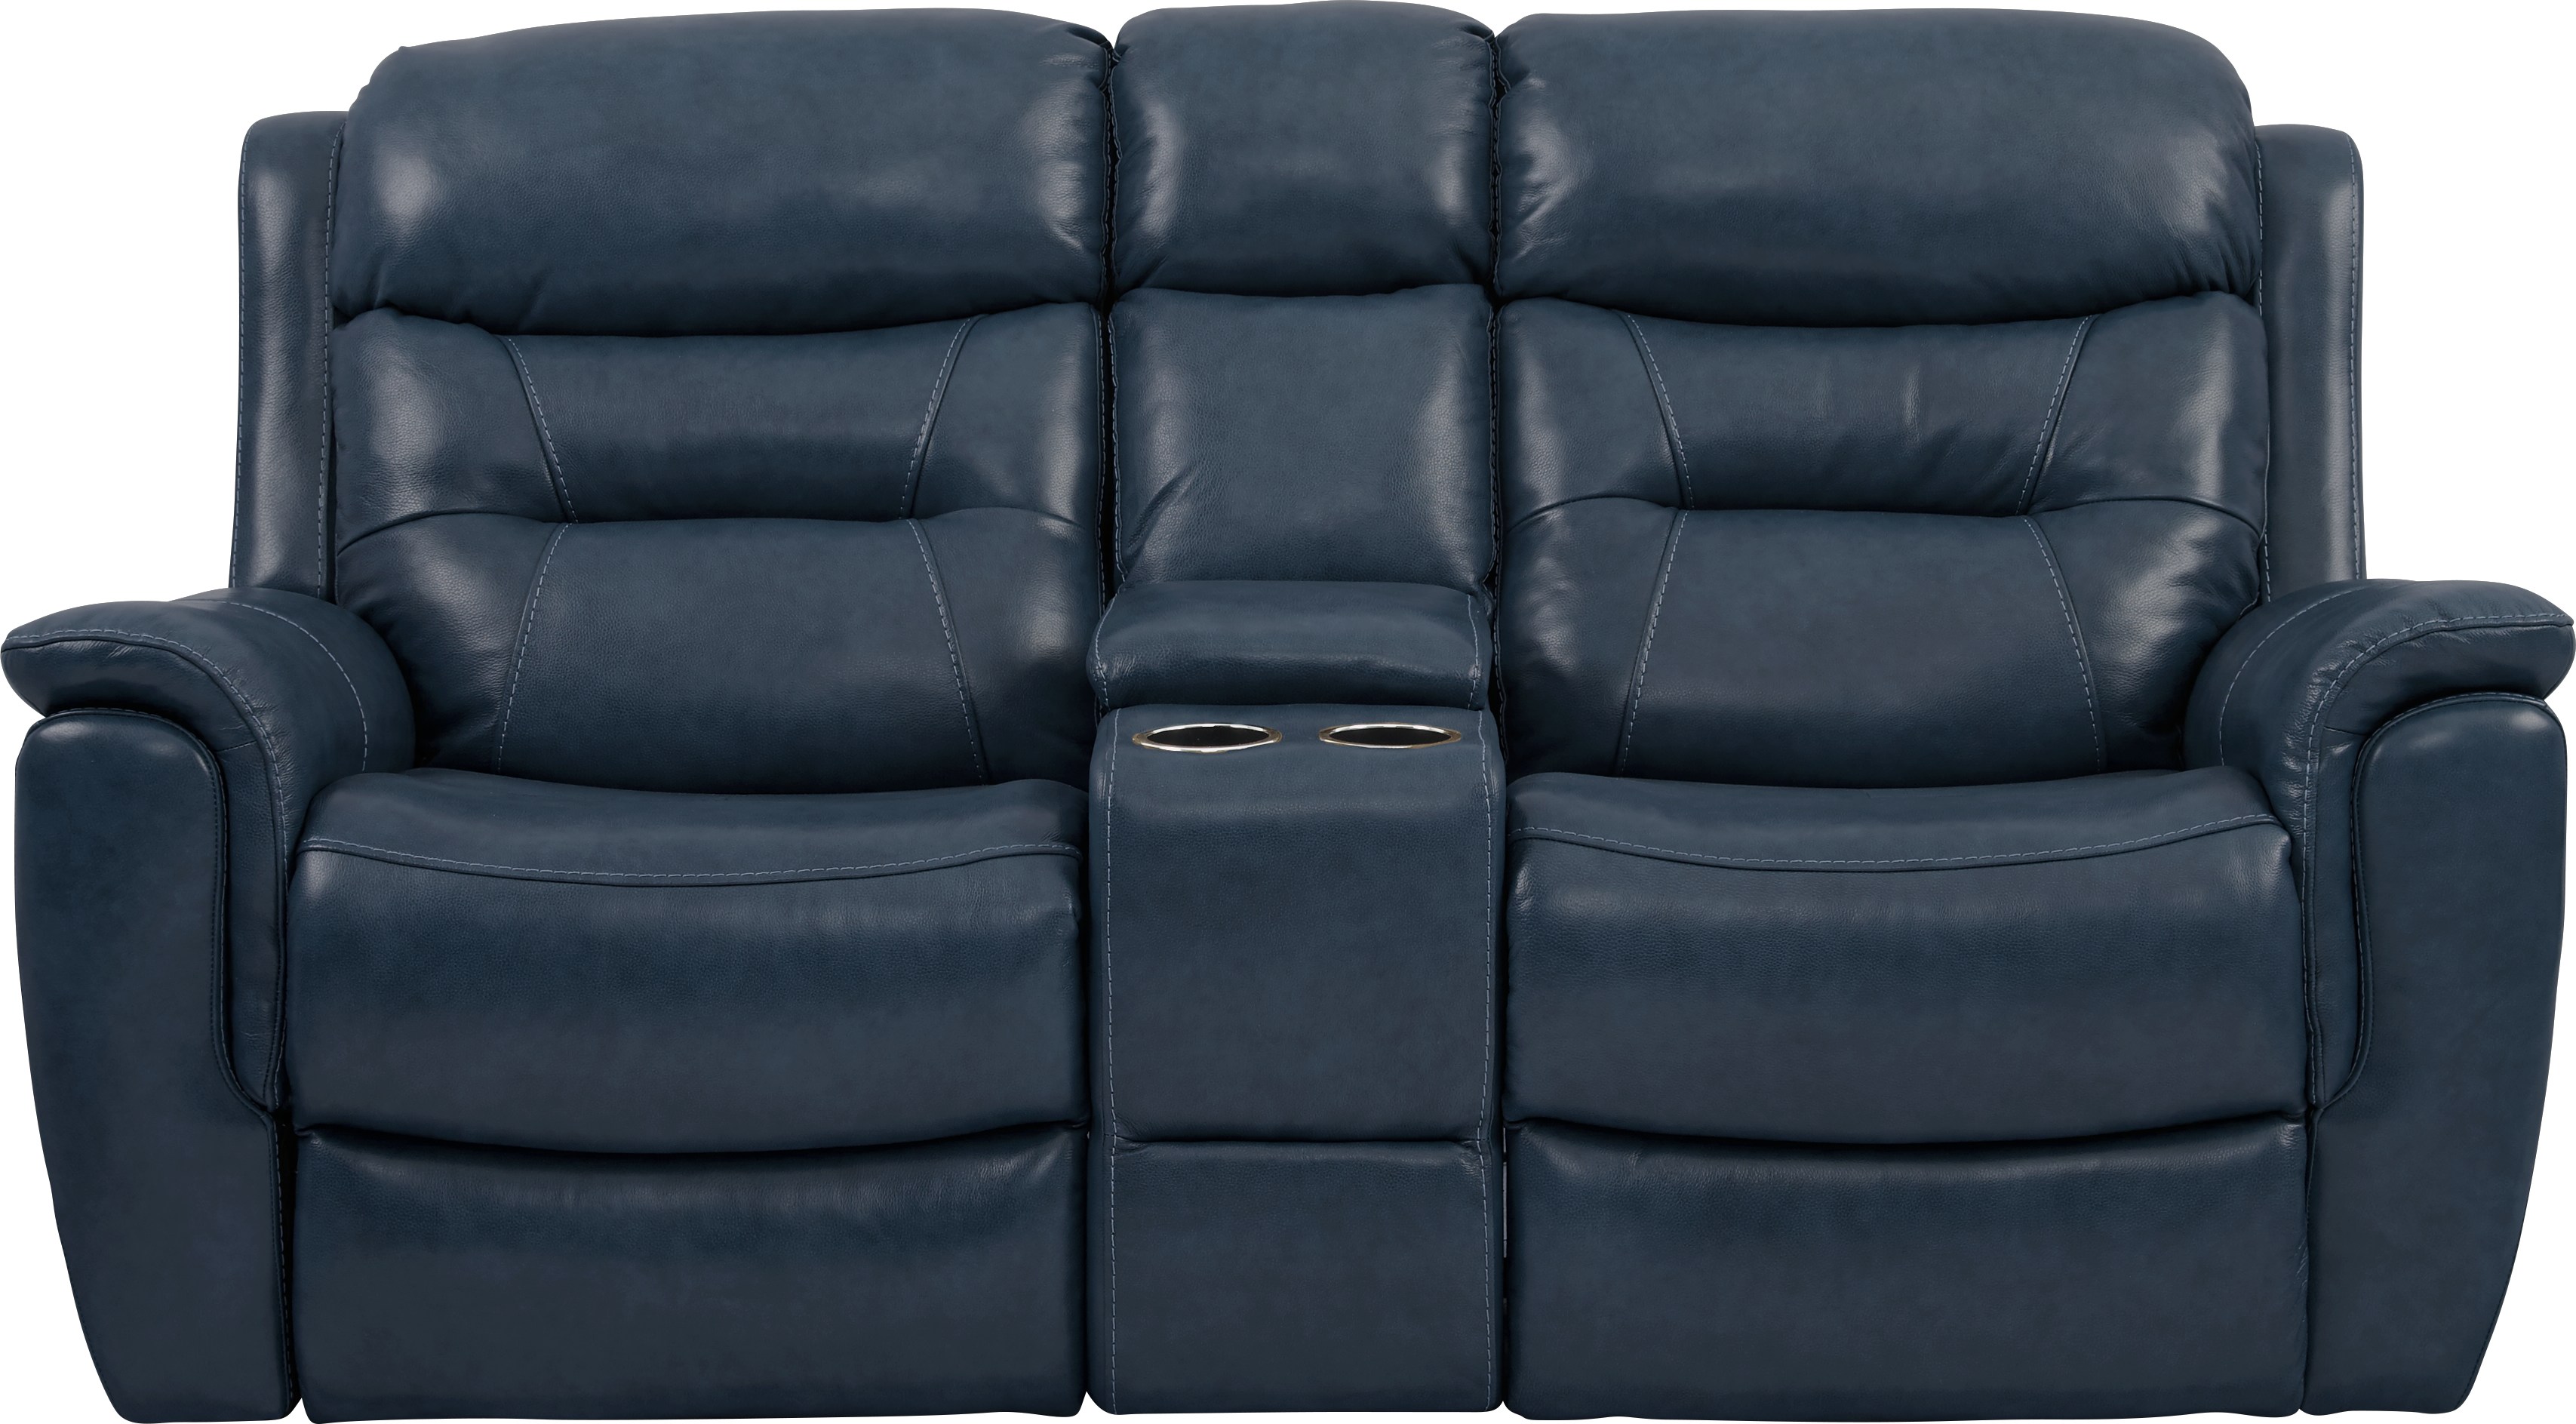 Sabella Navy Leather Reclining Console Loveseat - Leather Loveseats (Blue)